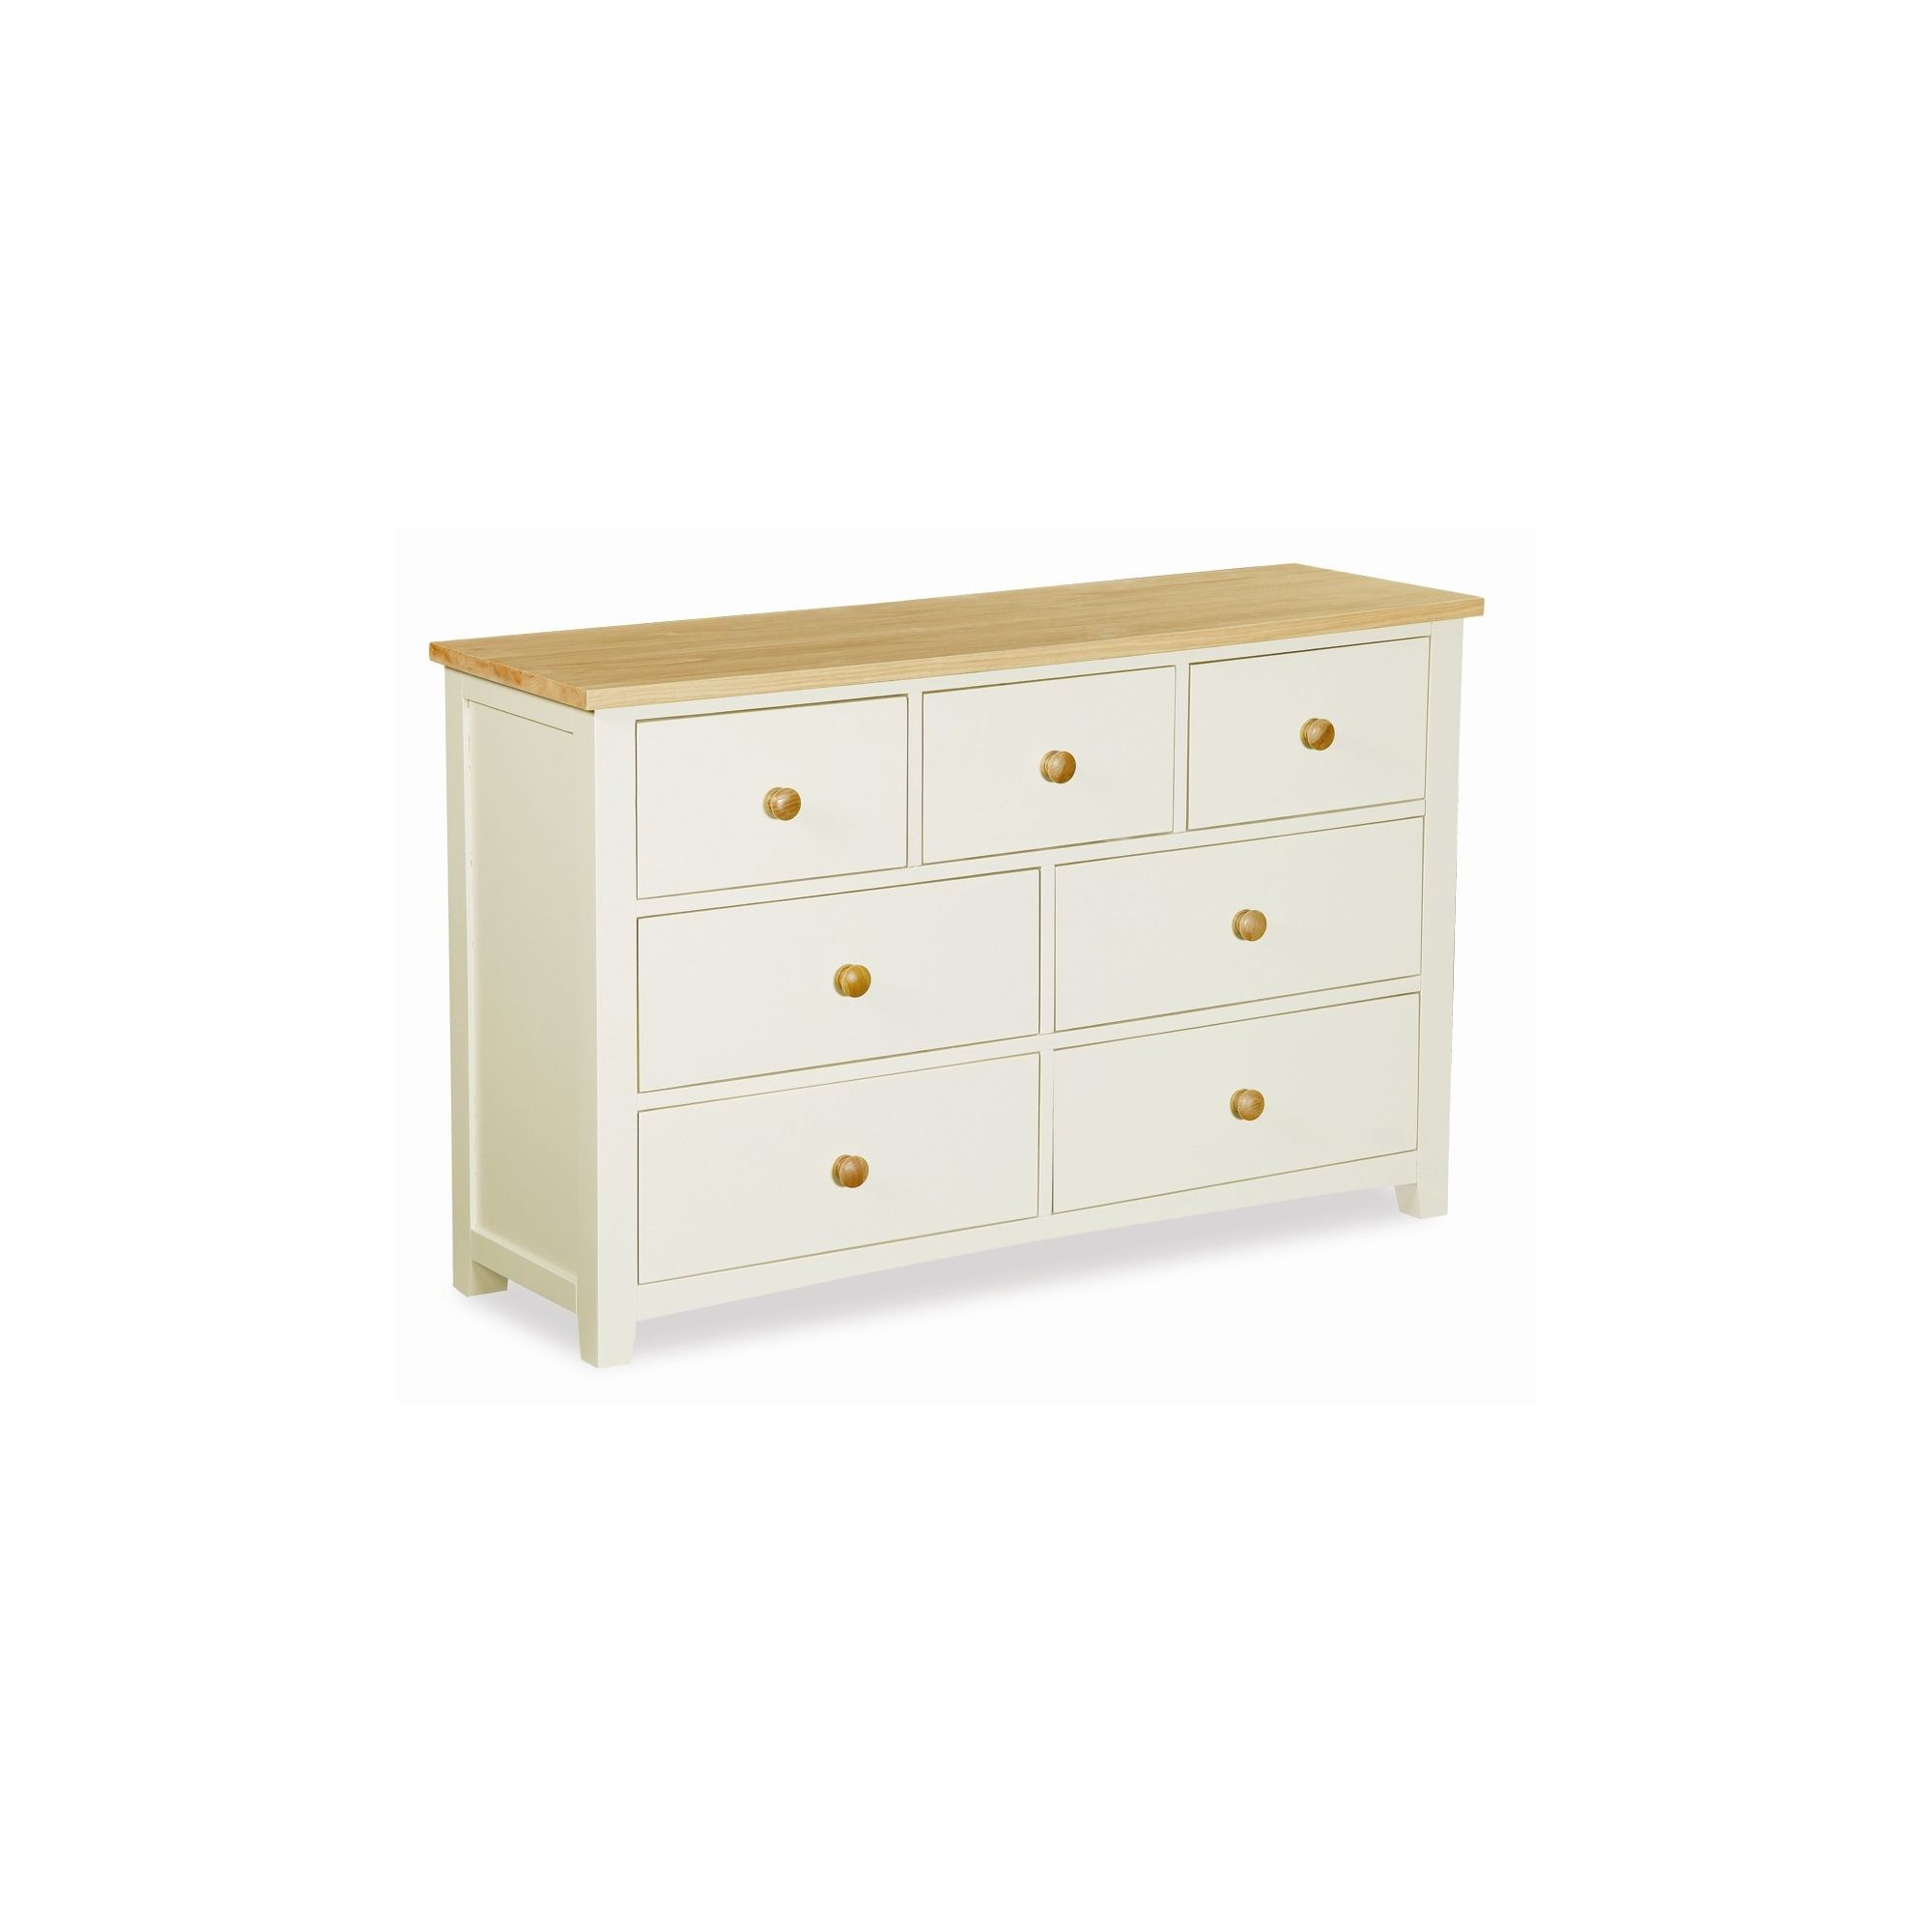 Alterton Furniture St. Ives 3 Over 4 Drawer Chest at Tesco Direct